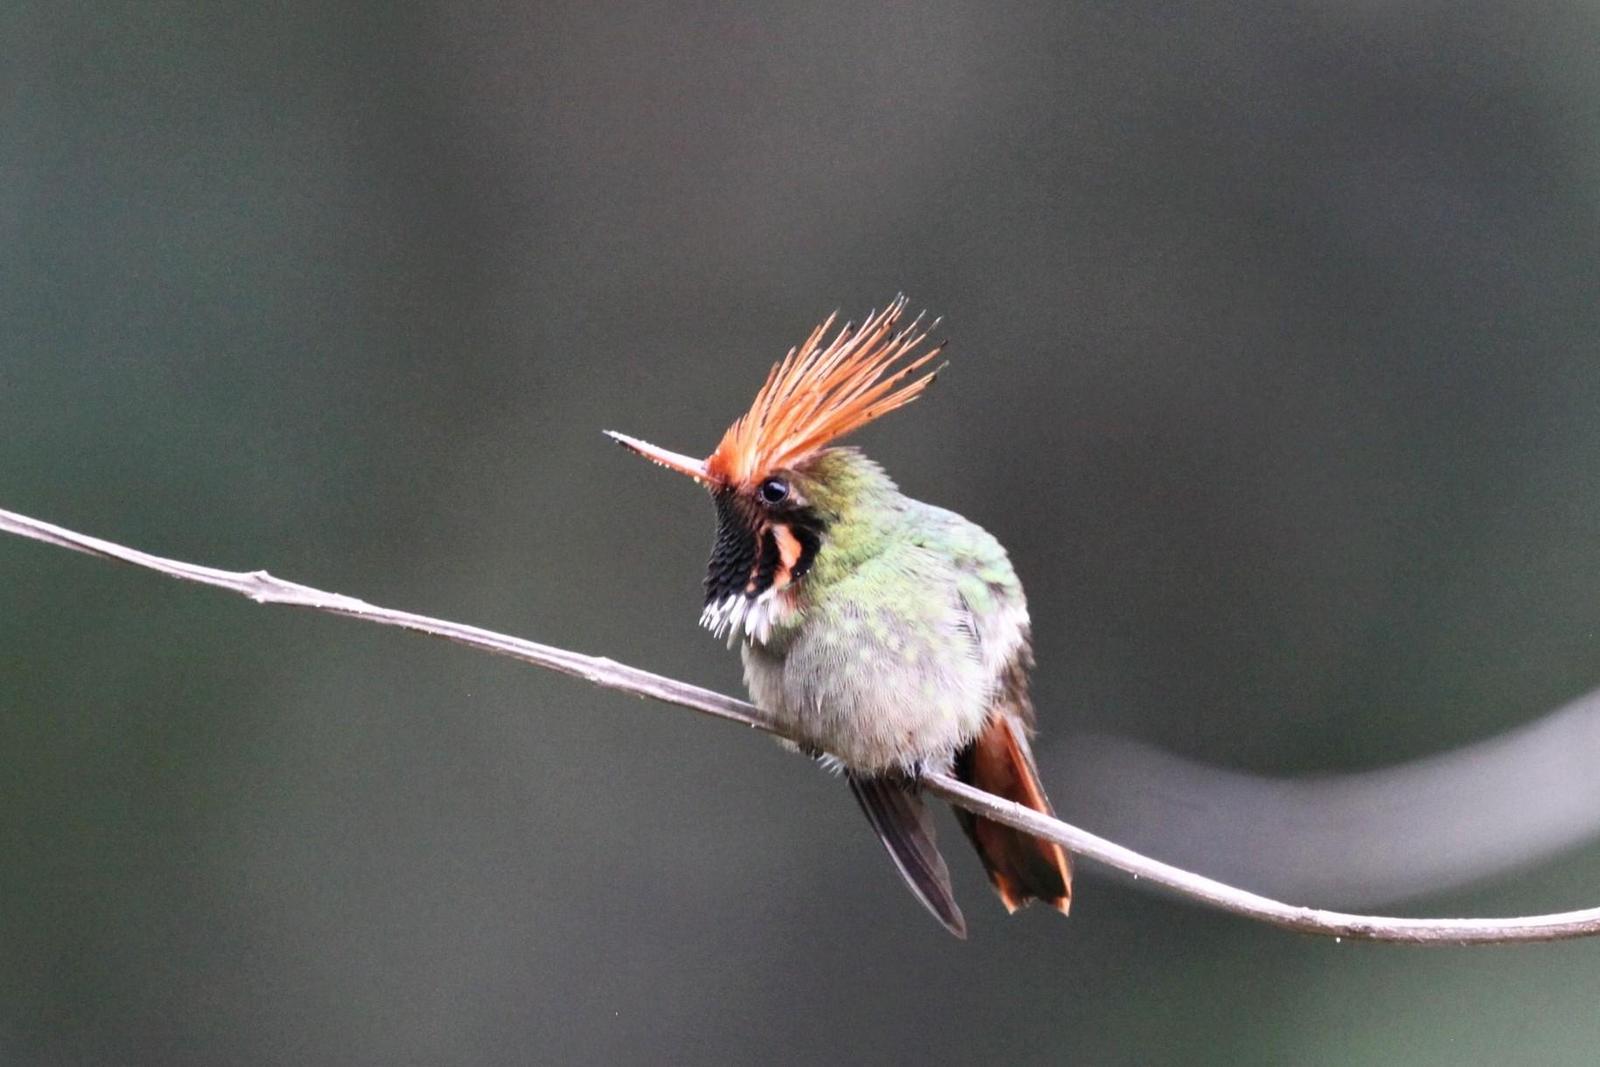 Rufous-crested Coquette Photo by Marie Z. Gardner